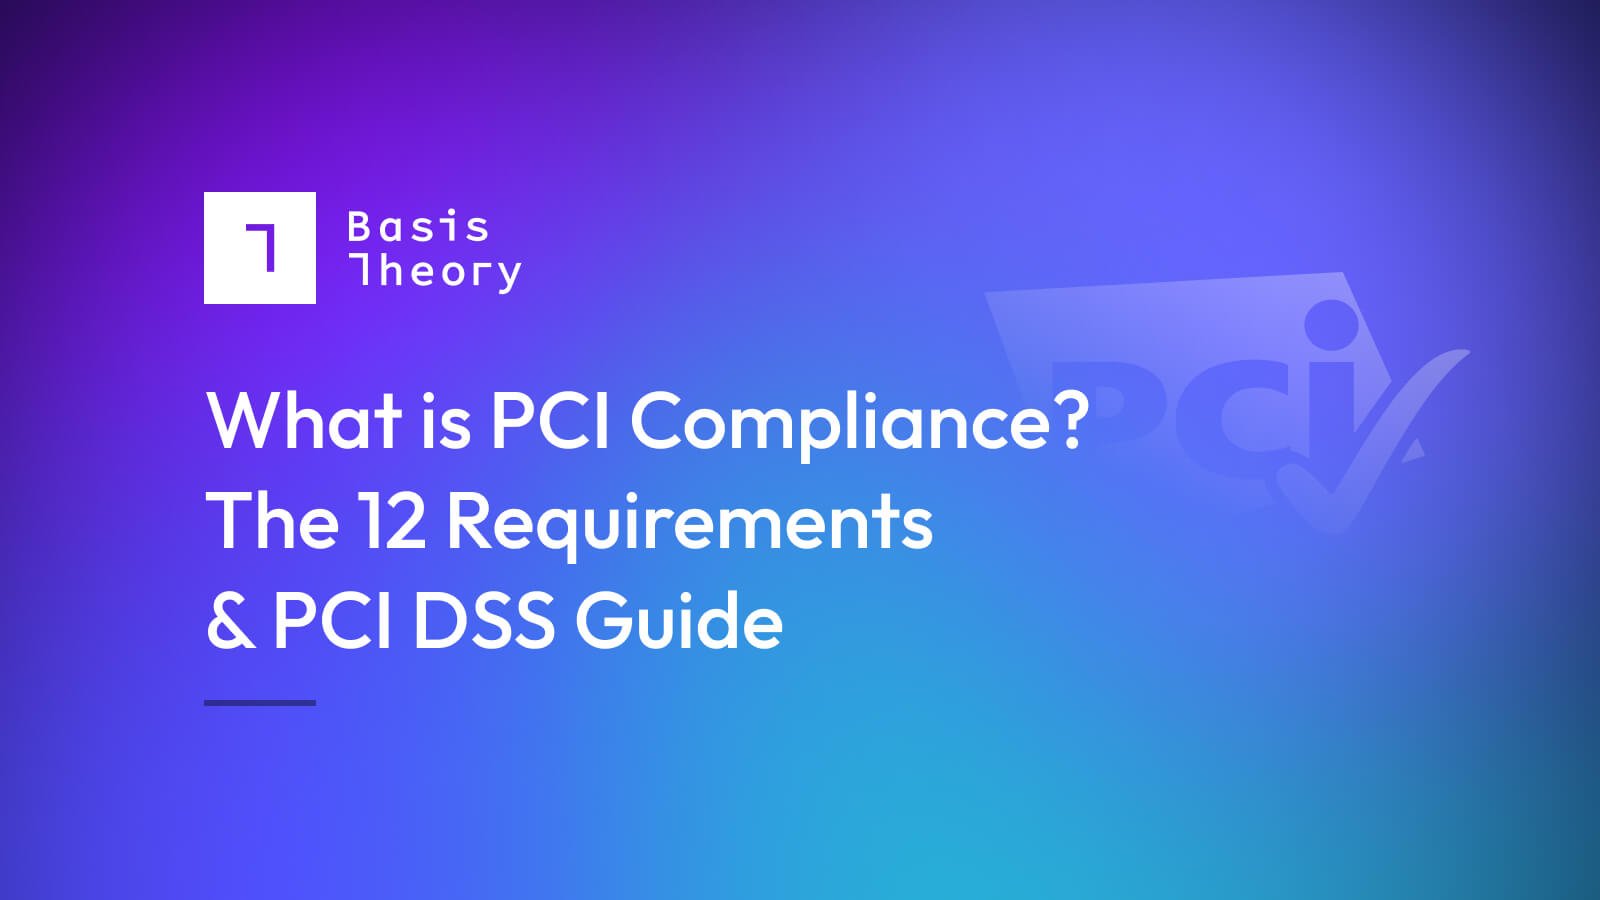 what is PCI compliance?